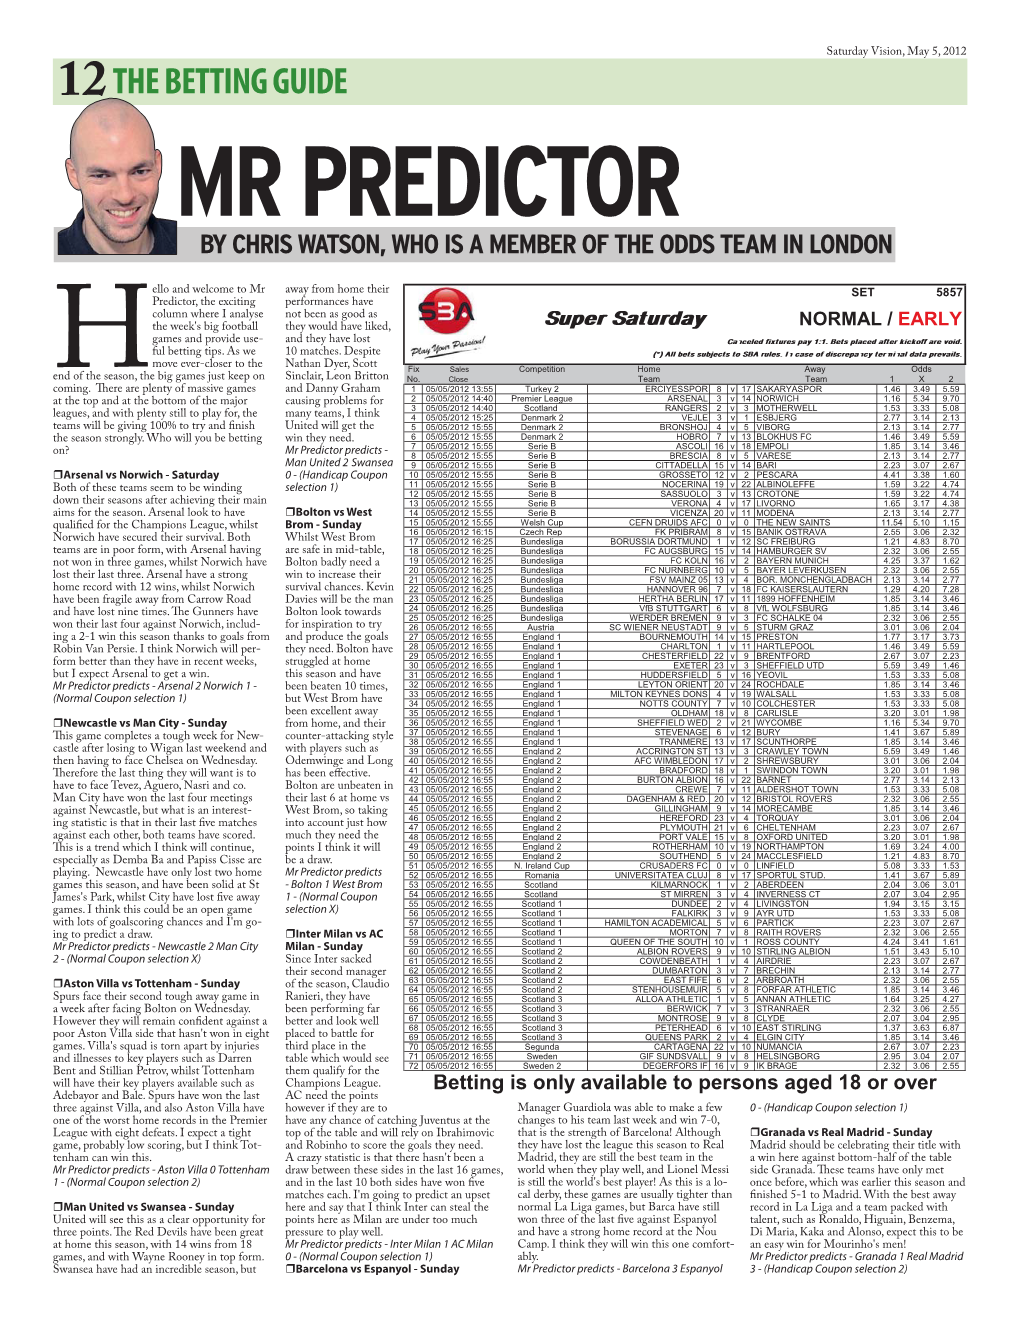 Mr Predictor by Chris Watson, Who Is a Member of the Odds Team in London